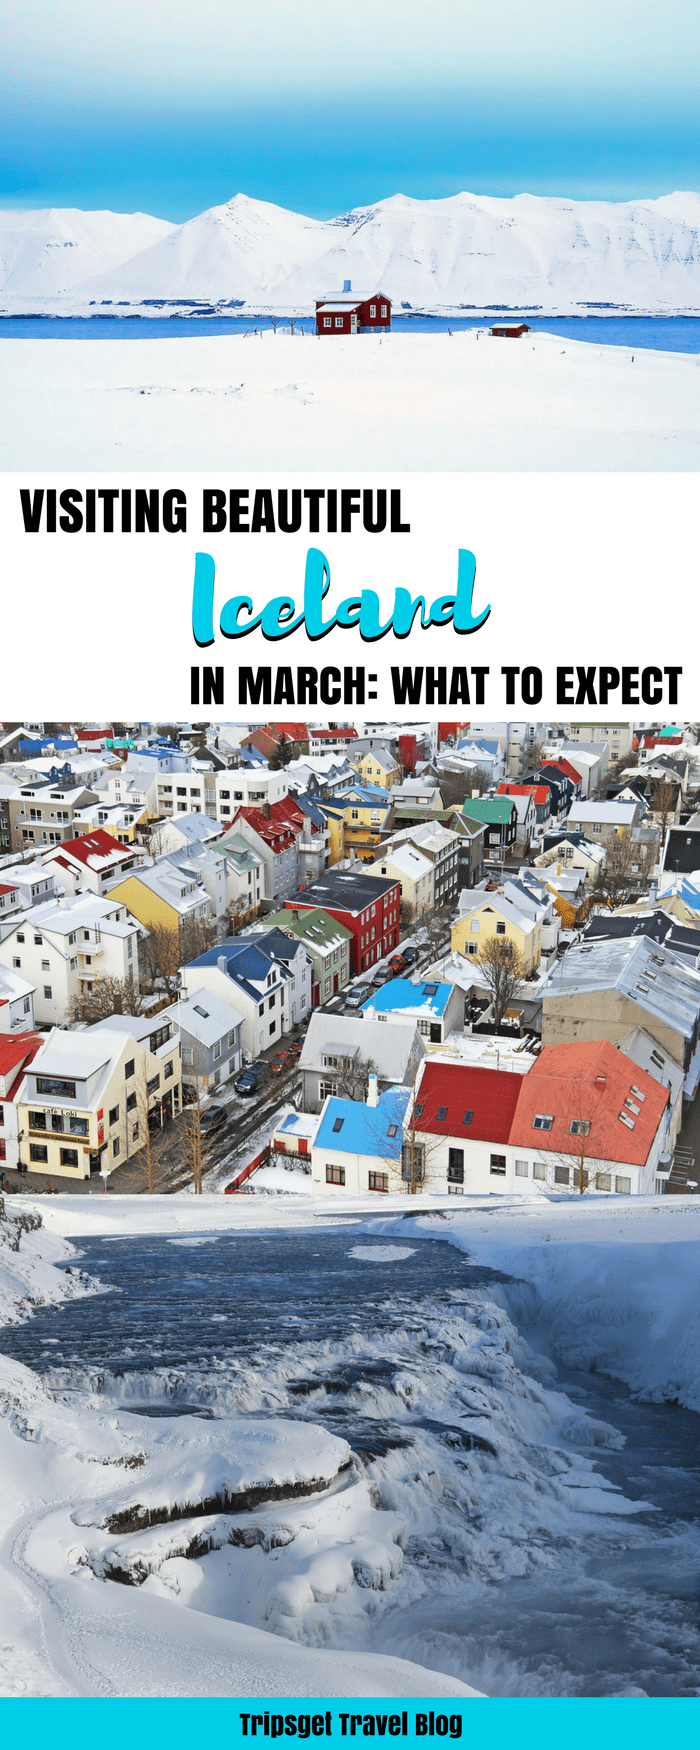 Solo trip to Iceland: how to organize a trip to Iceland. My solo trip to Iceland in March. Gulfoss, Geysir and Golden Circle. Northern Lights, Reykjavik and Blue Lagoon